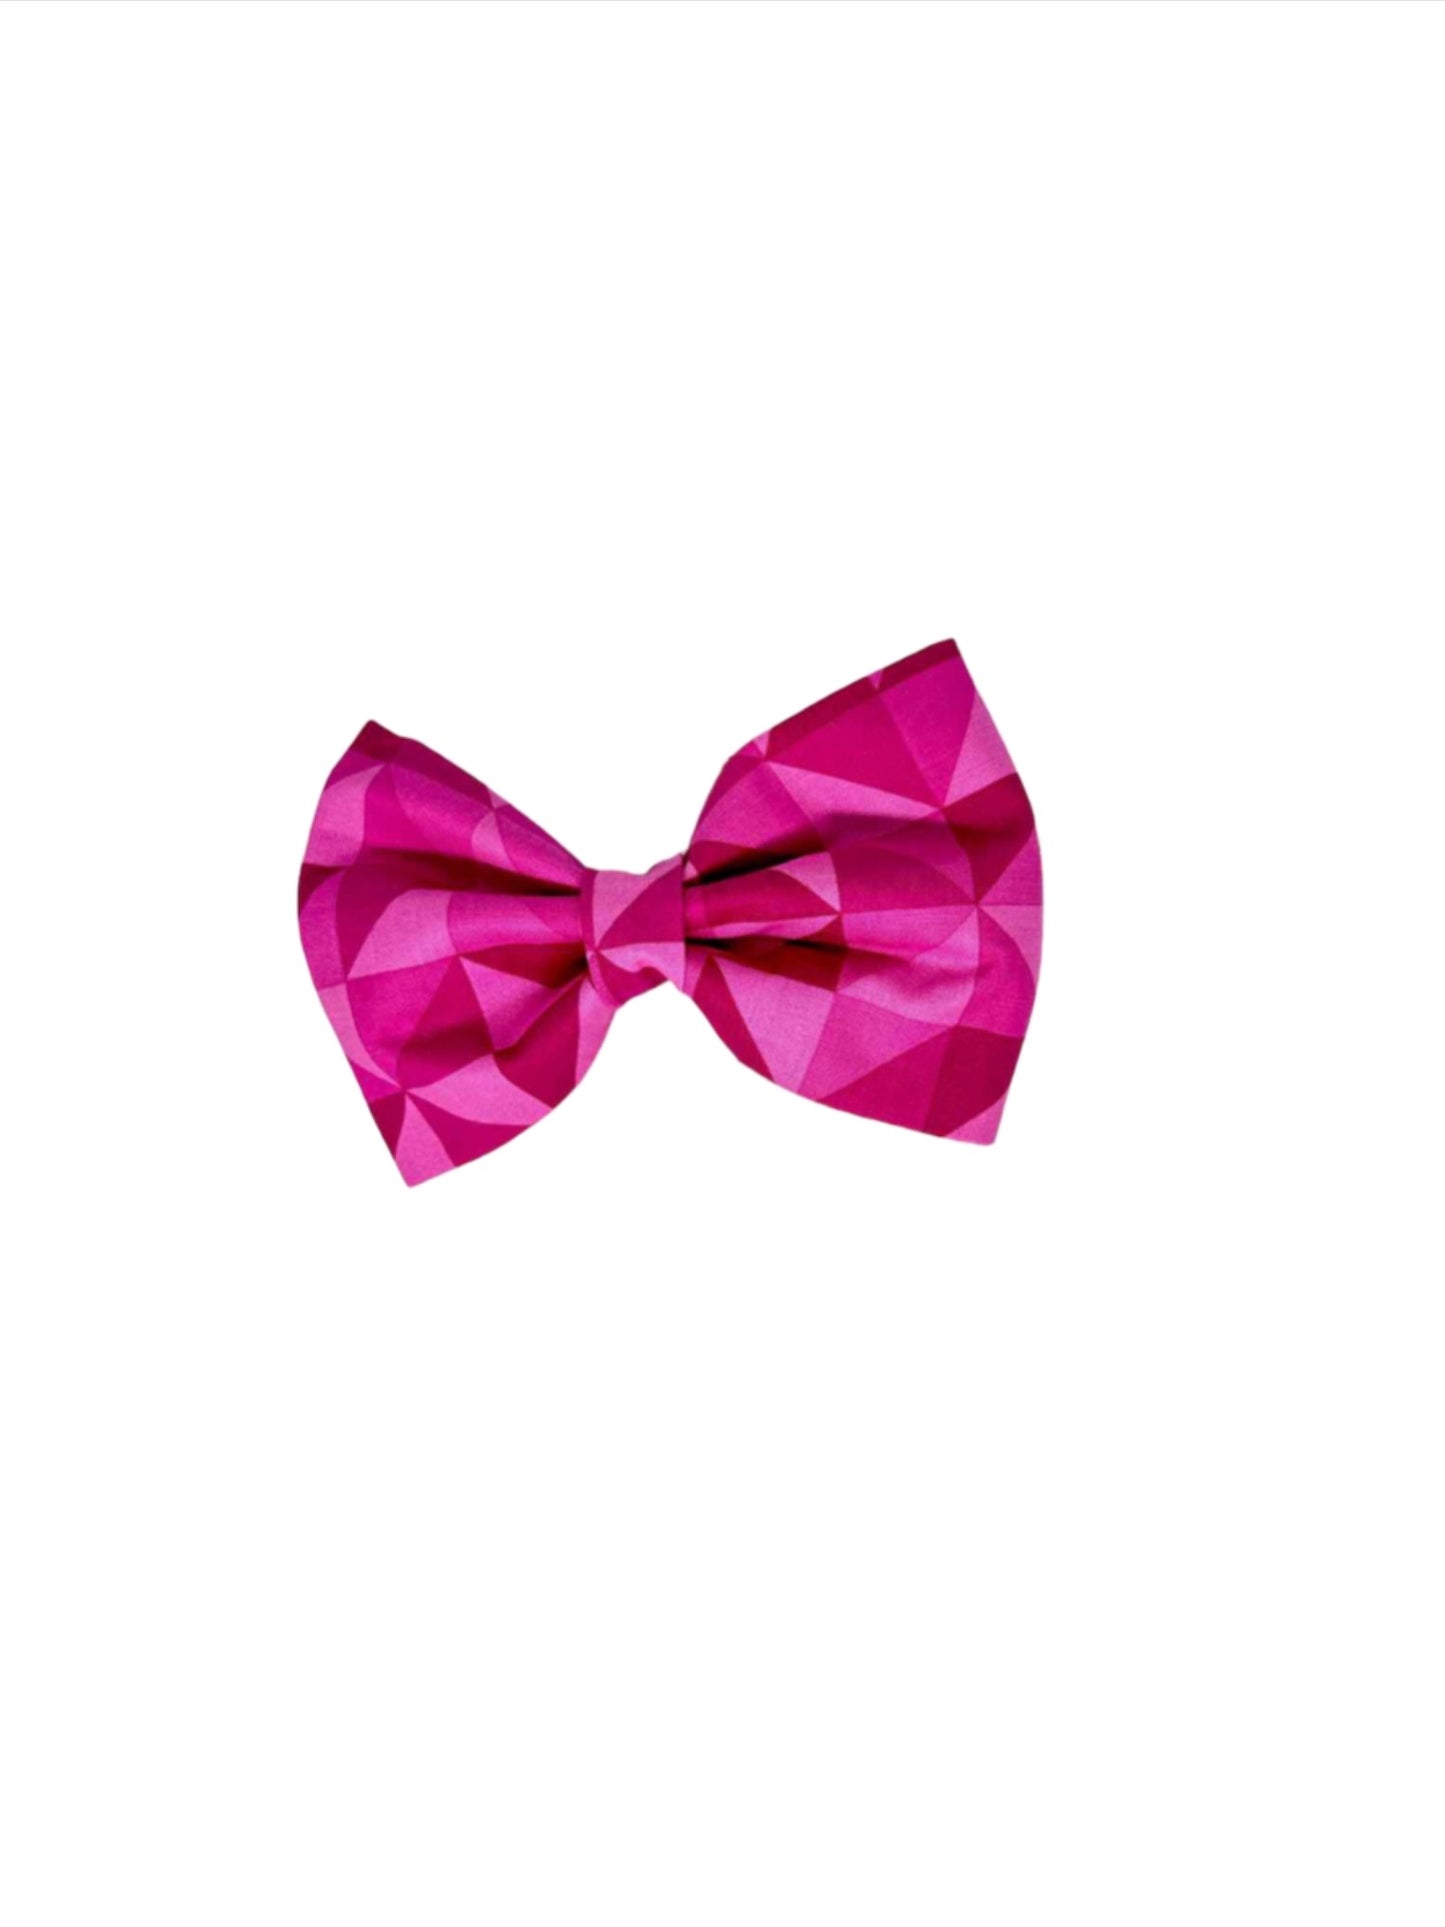 Hot Pink Half Square Bow Tie